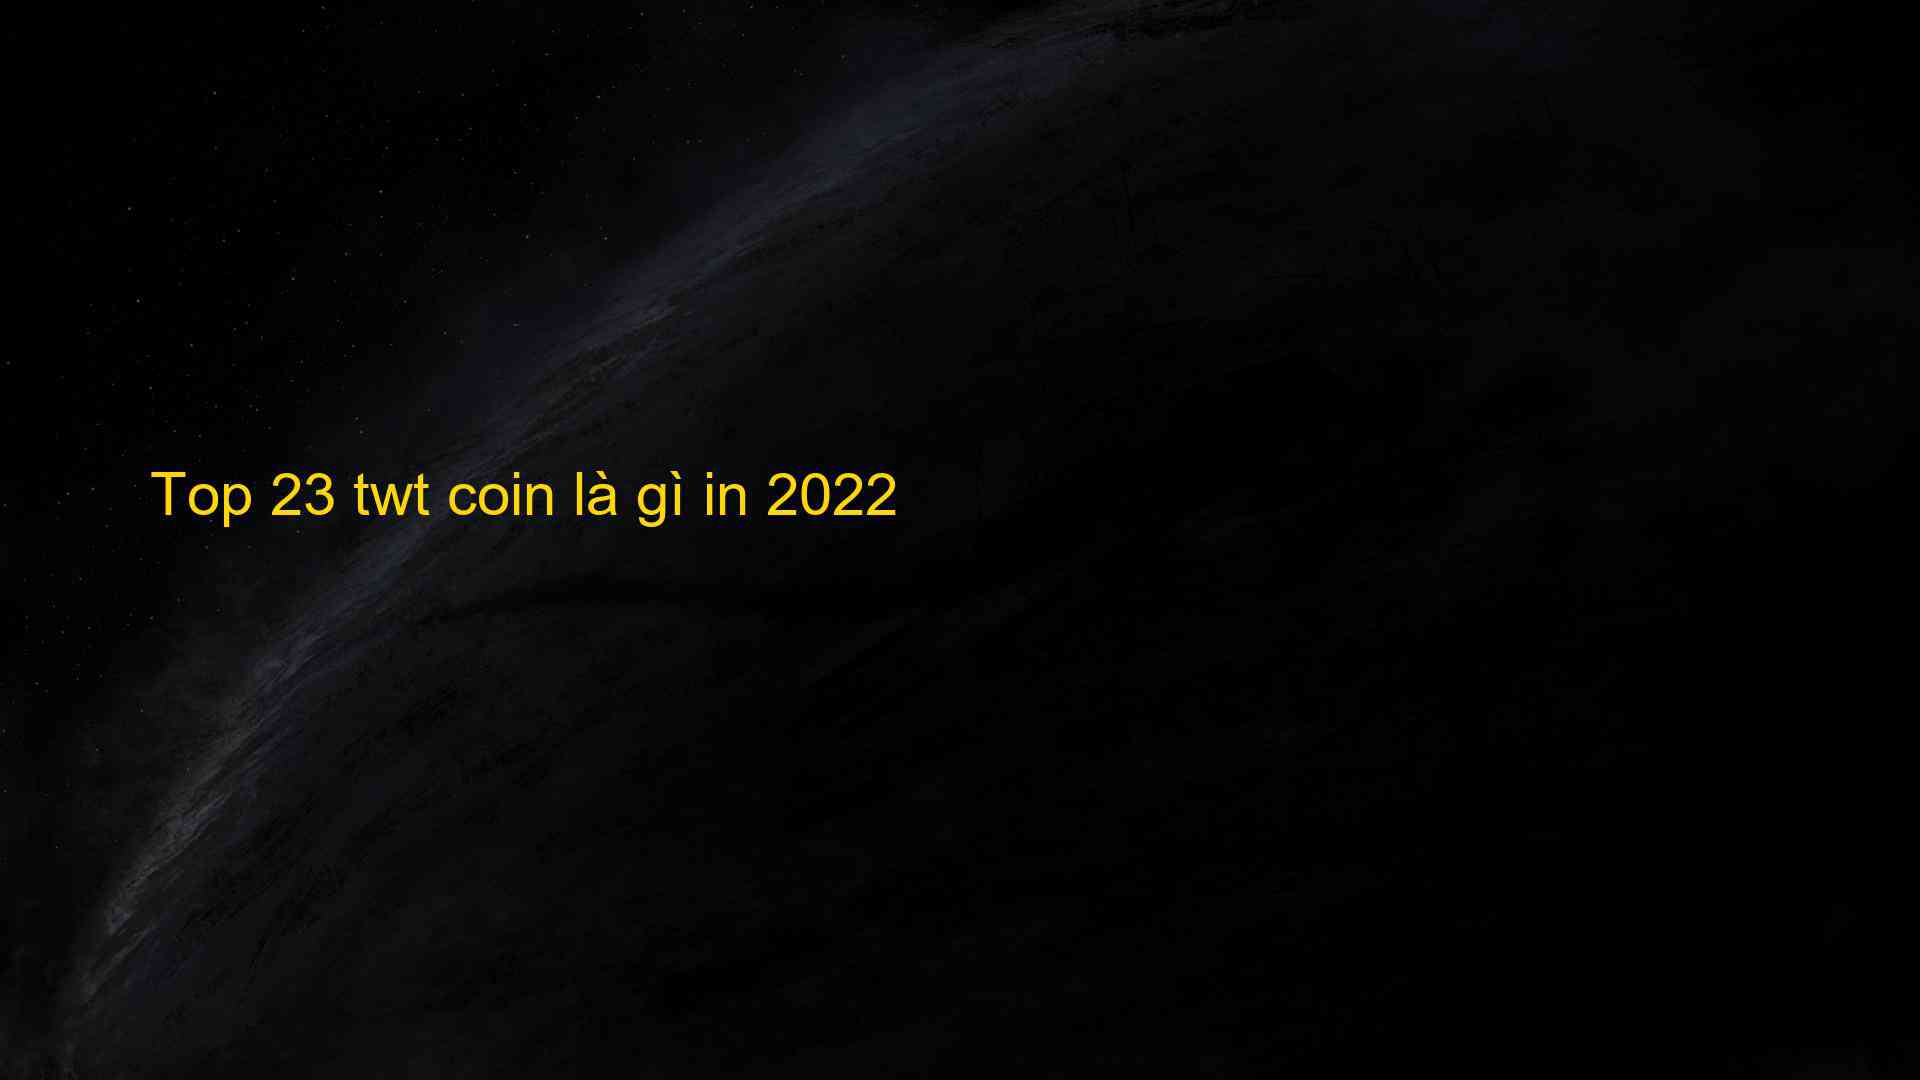 Top 23 twt coin la gi in 2022 1659573482